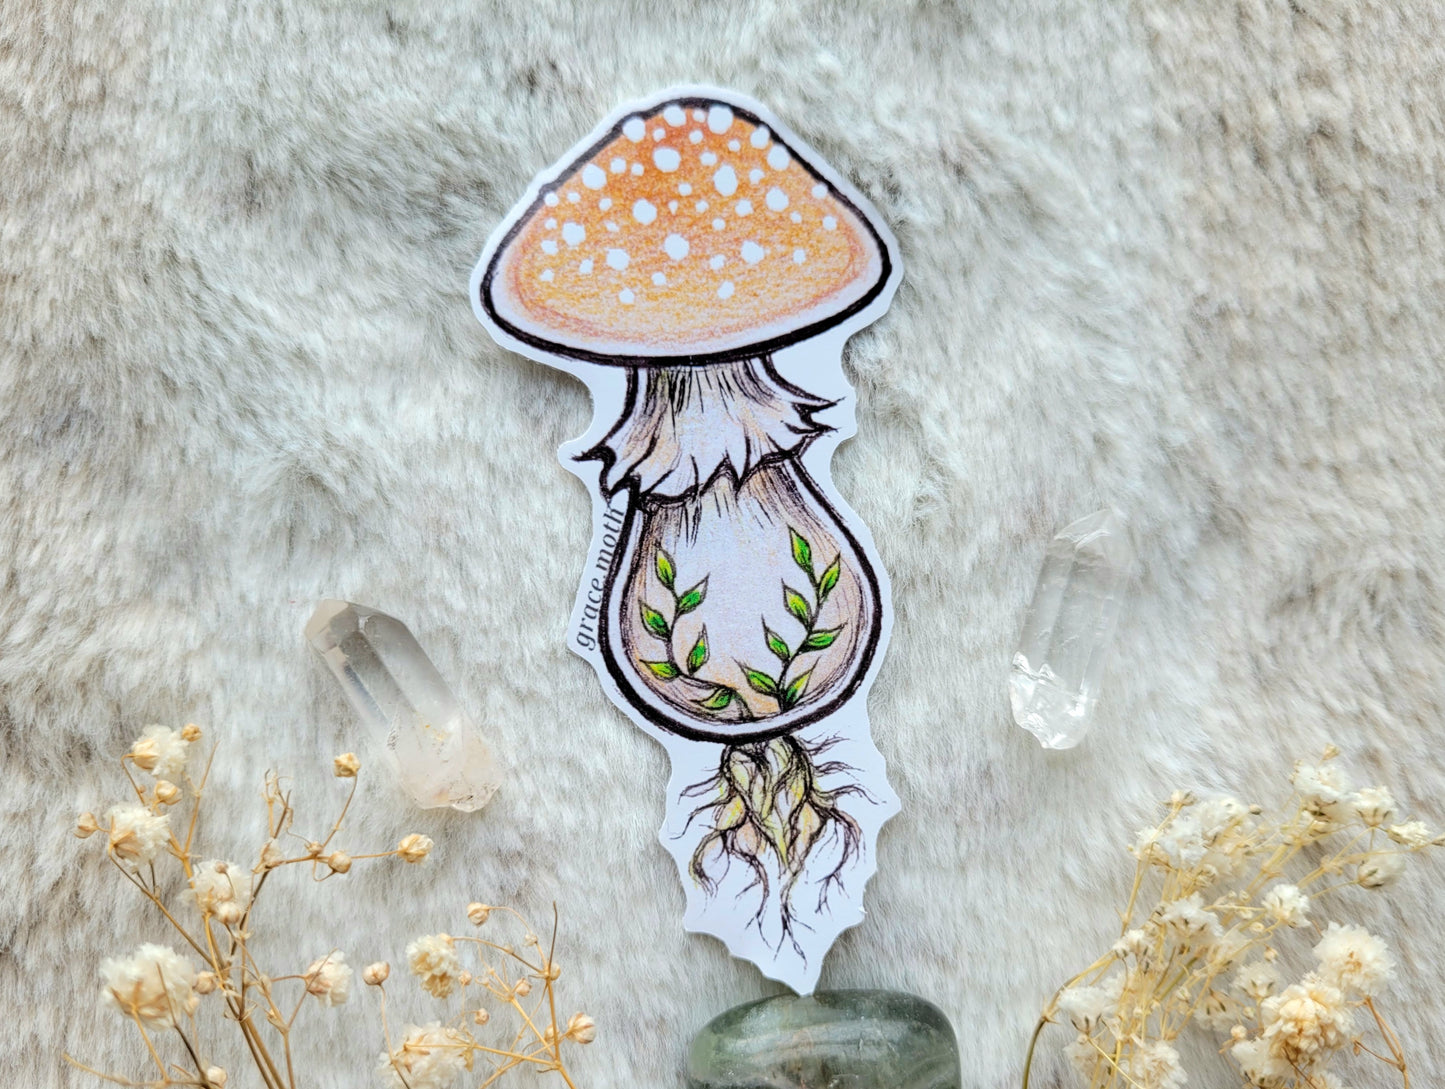 Peach Mushroom - Vinyl Sticker 10cm - Illustrated by Grace moth. Witchy, cottagecore, fantasy, folklore, fairy